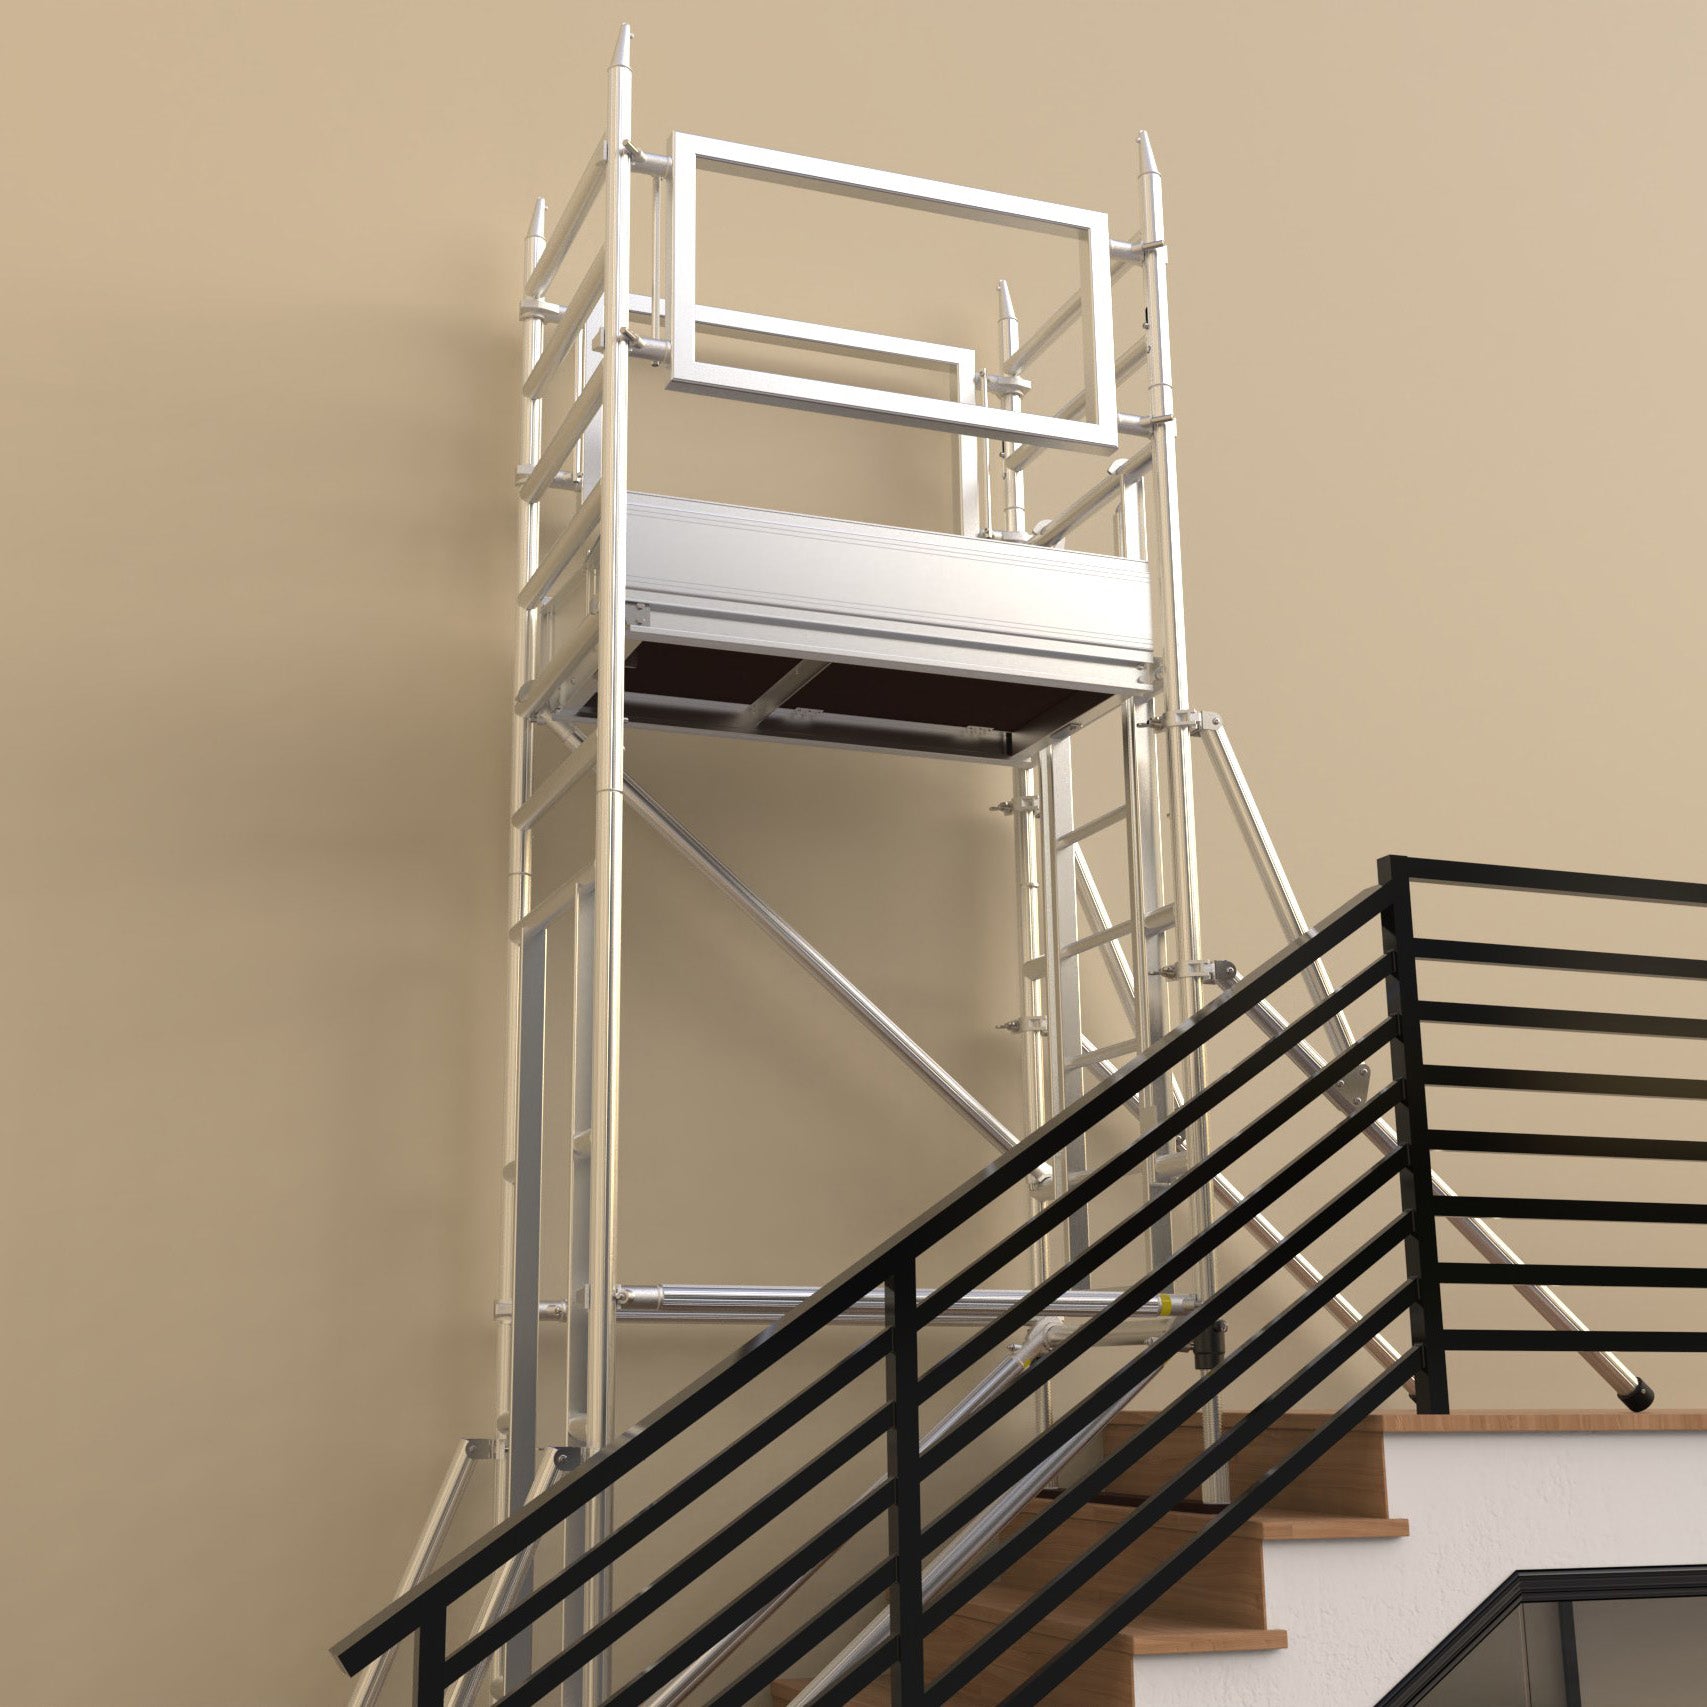 An image showing the Alto Stairwell Pro Tower on a staircase 